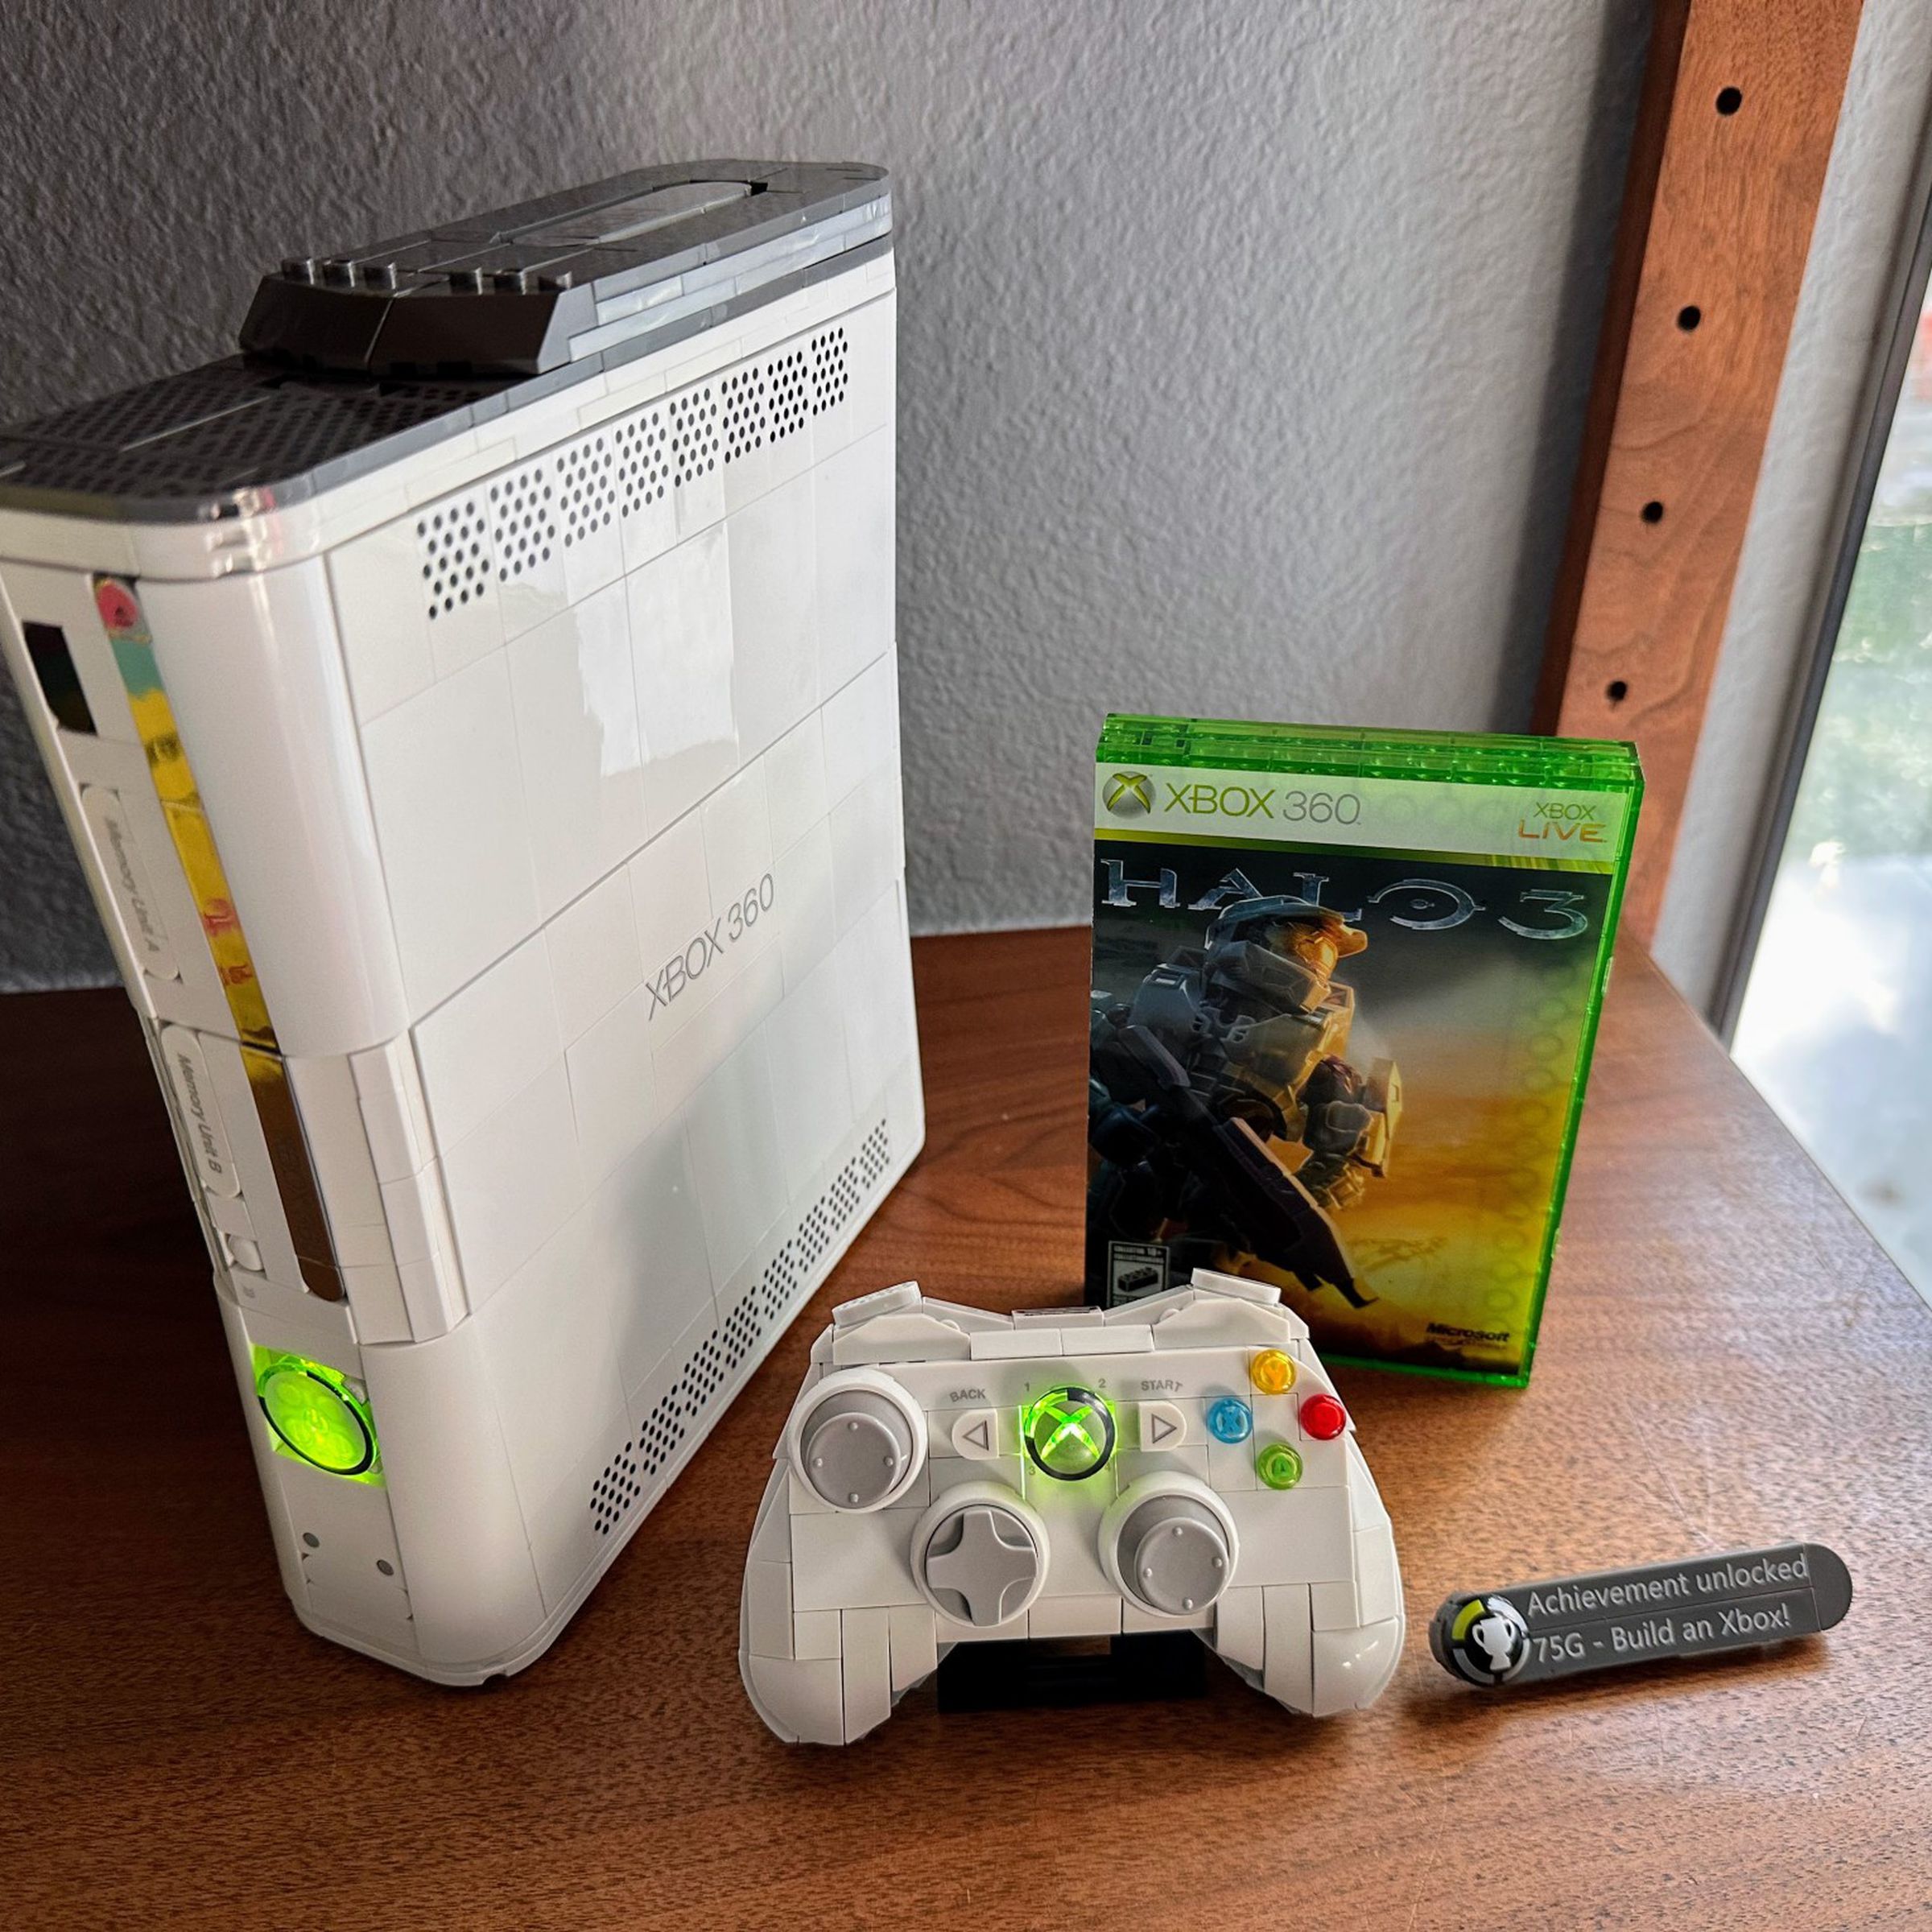 Along with the Xbox 360 console, you can also build a controller and a “copy” of Halo 3.